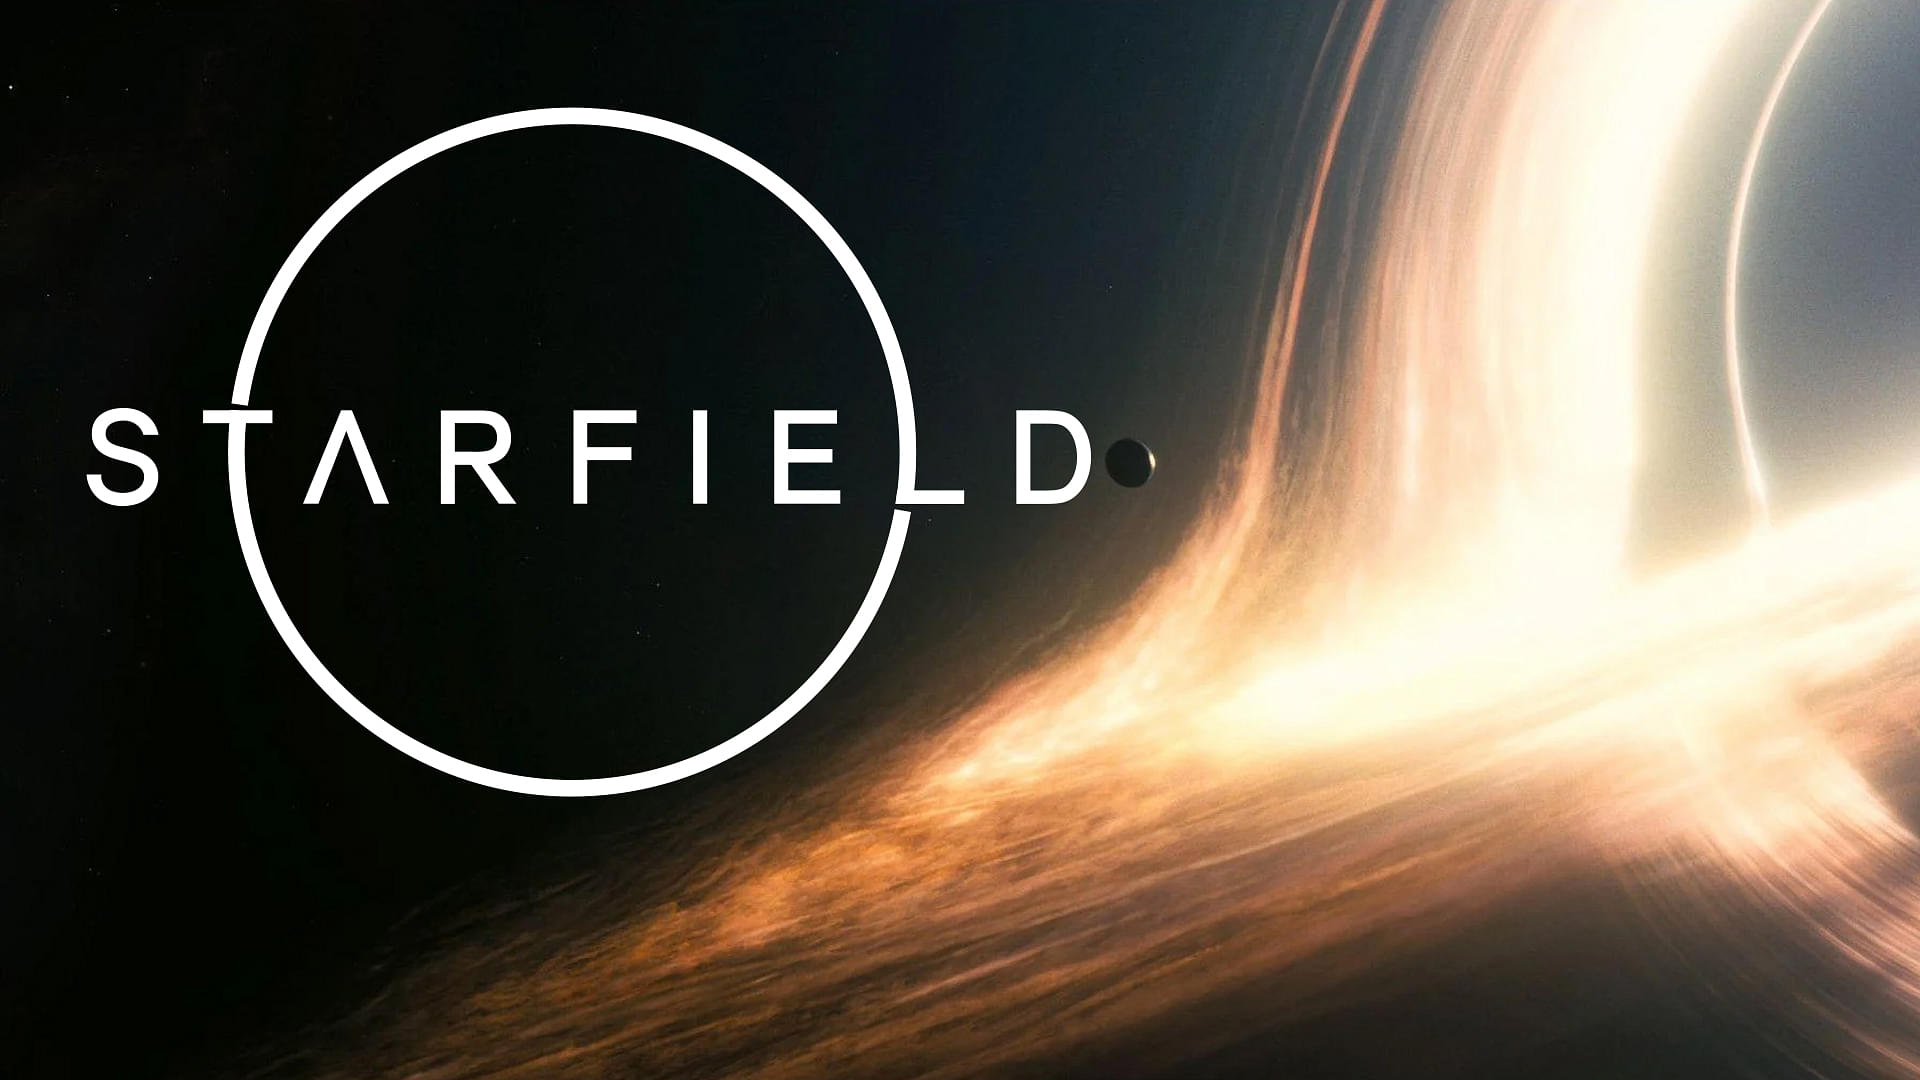 An image showing an image of a black hole with the logo of Starfield on left